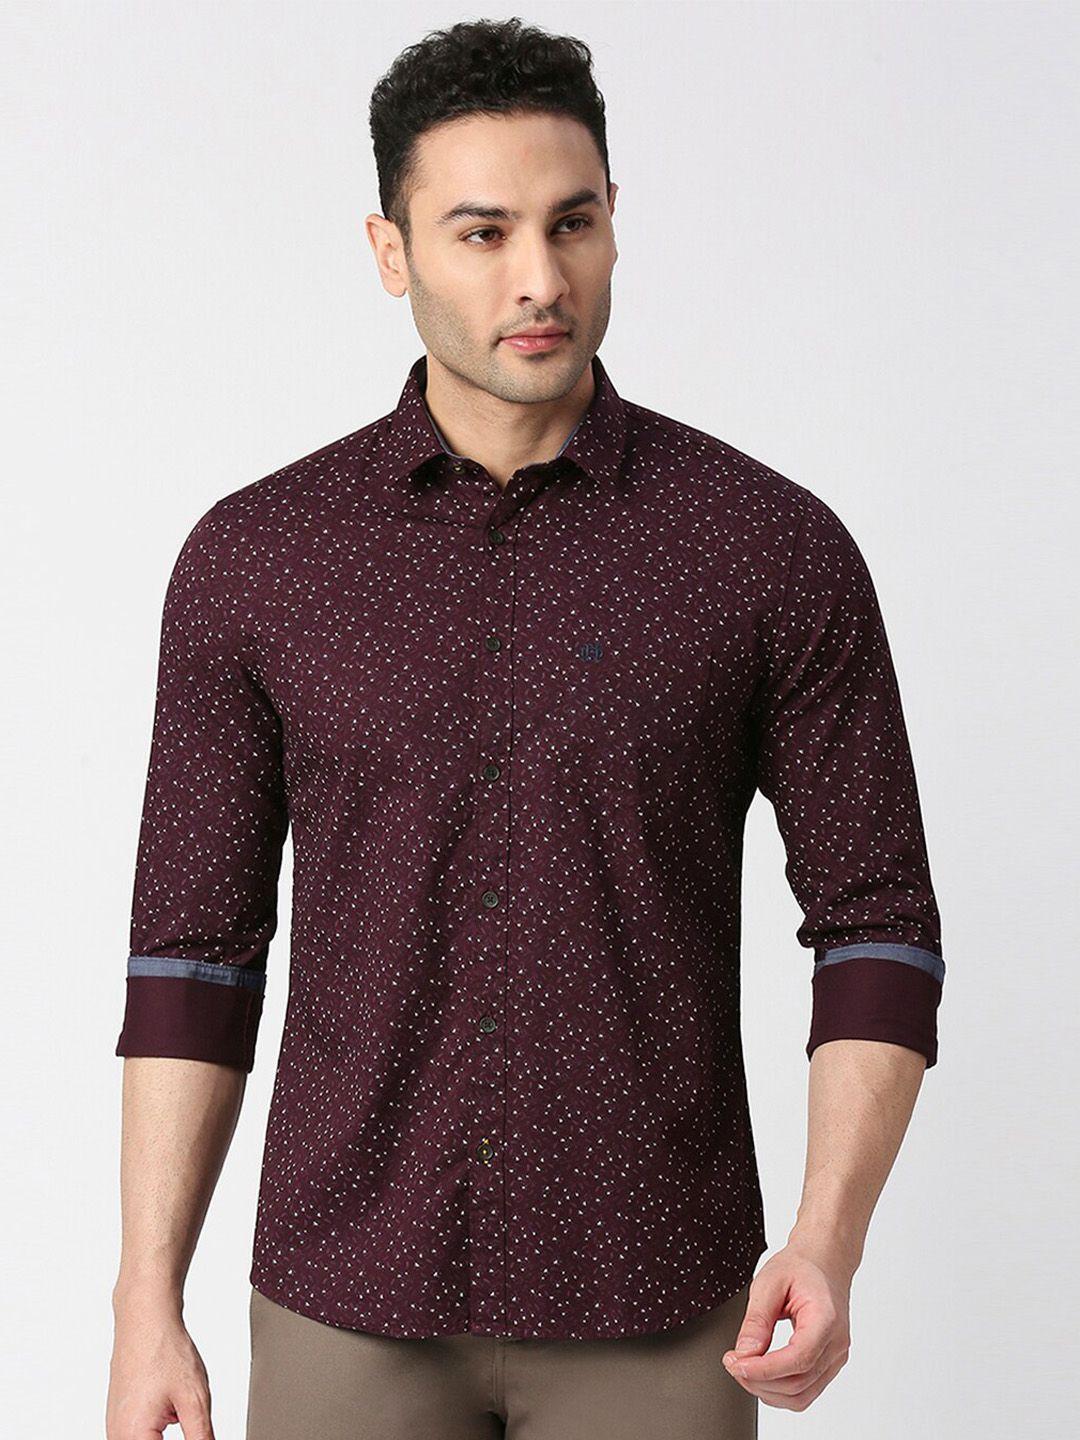 dragon hill slim fit floral printed spread collar cotton casual shirt